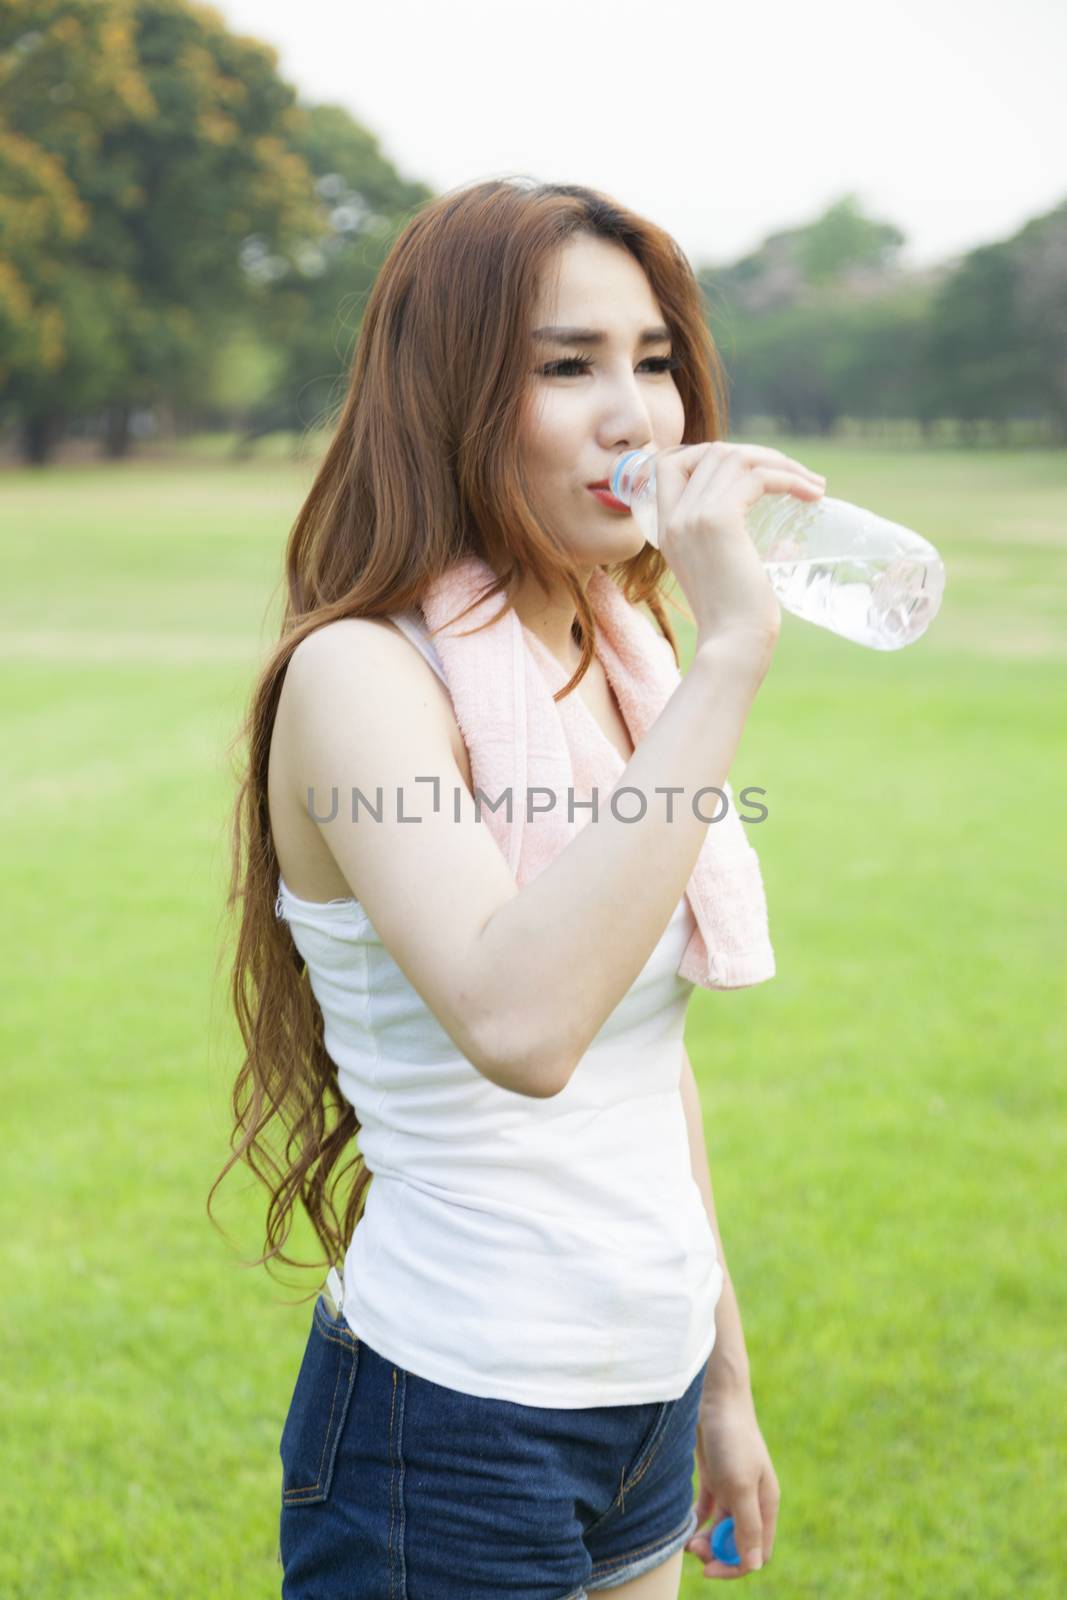 Woman standing breaks and drink water after jogging on grass in the park.